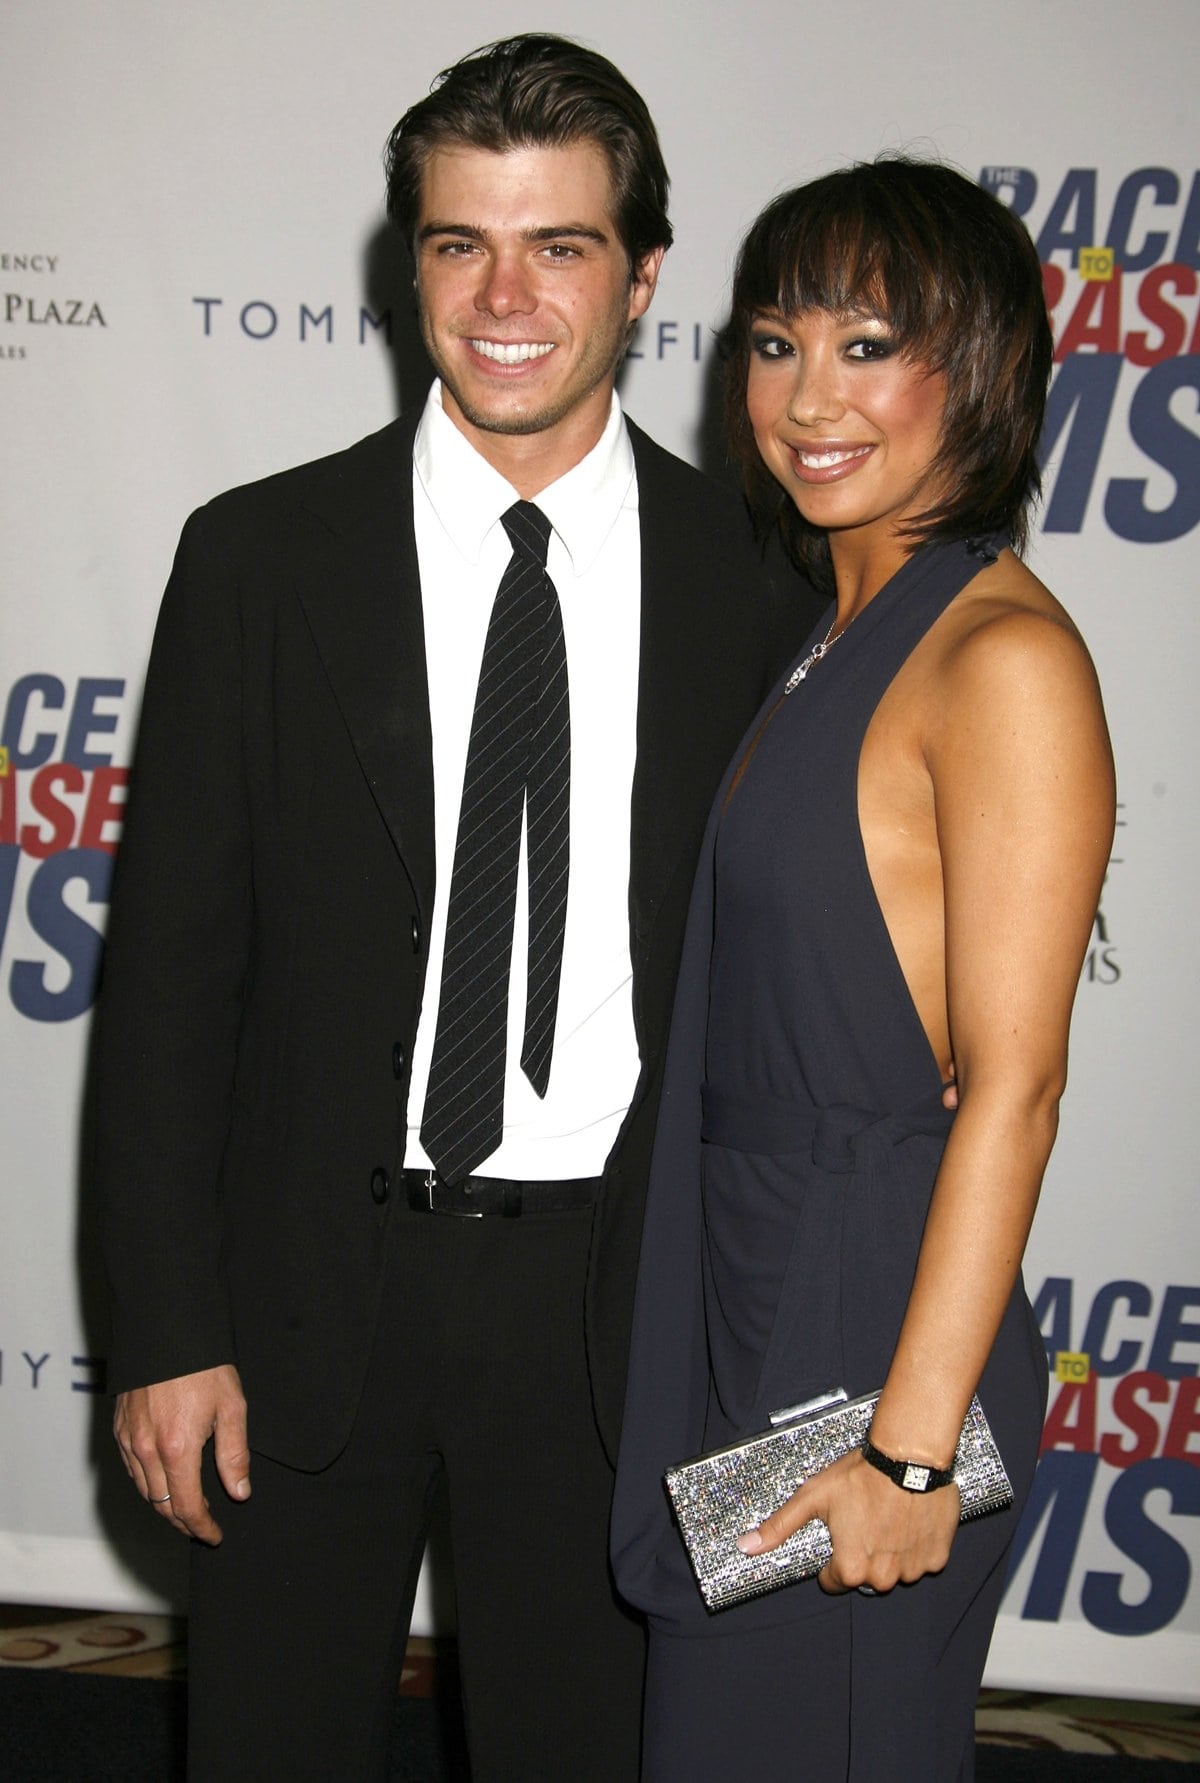 Matthew Lawrence and Cheryl Burke were introduced in 2007